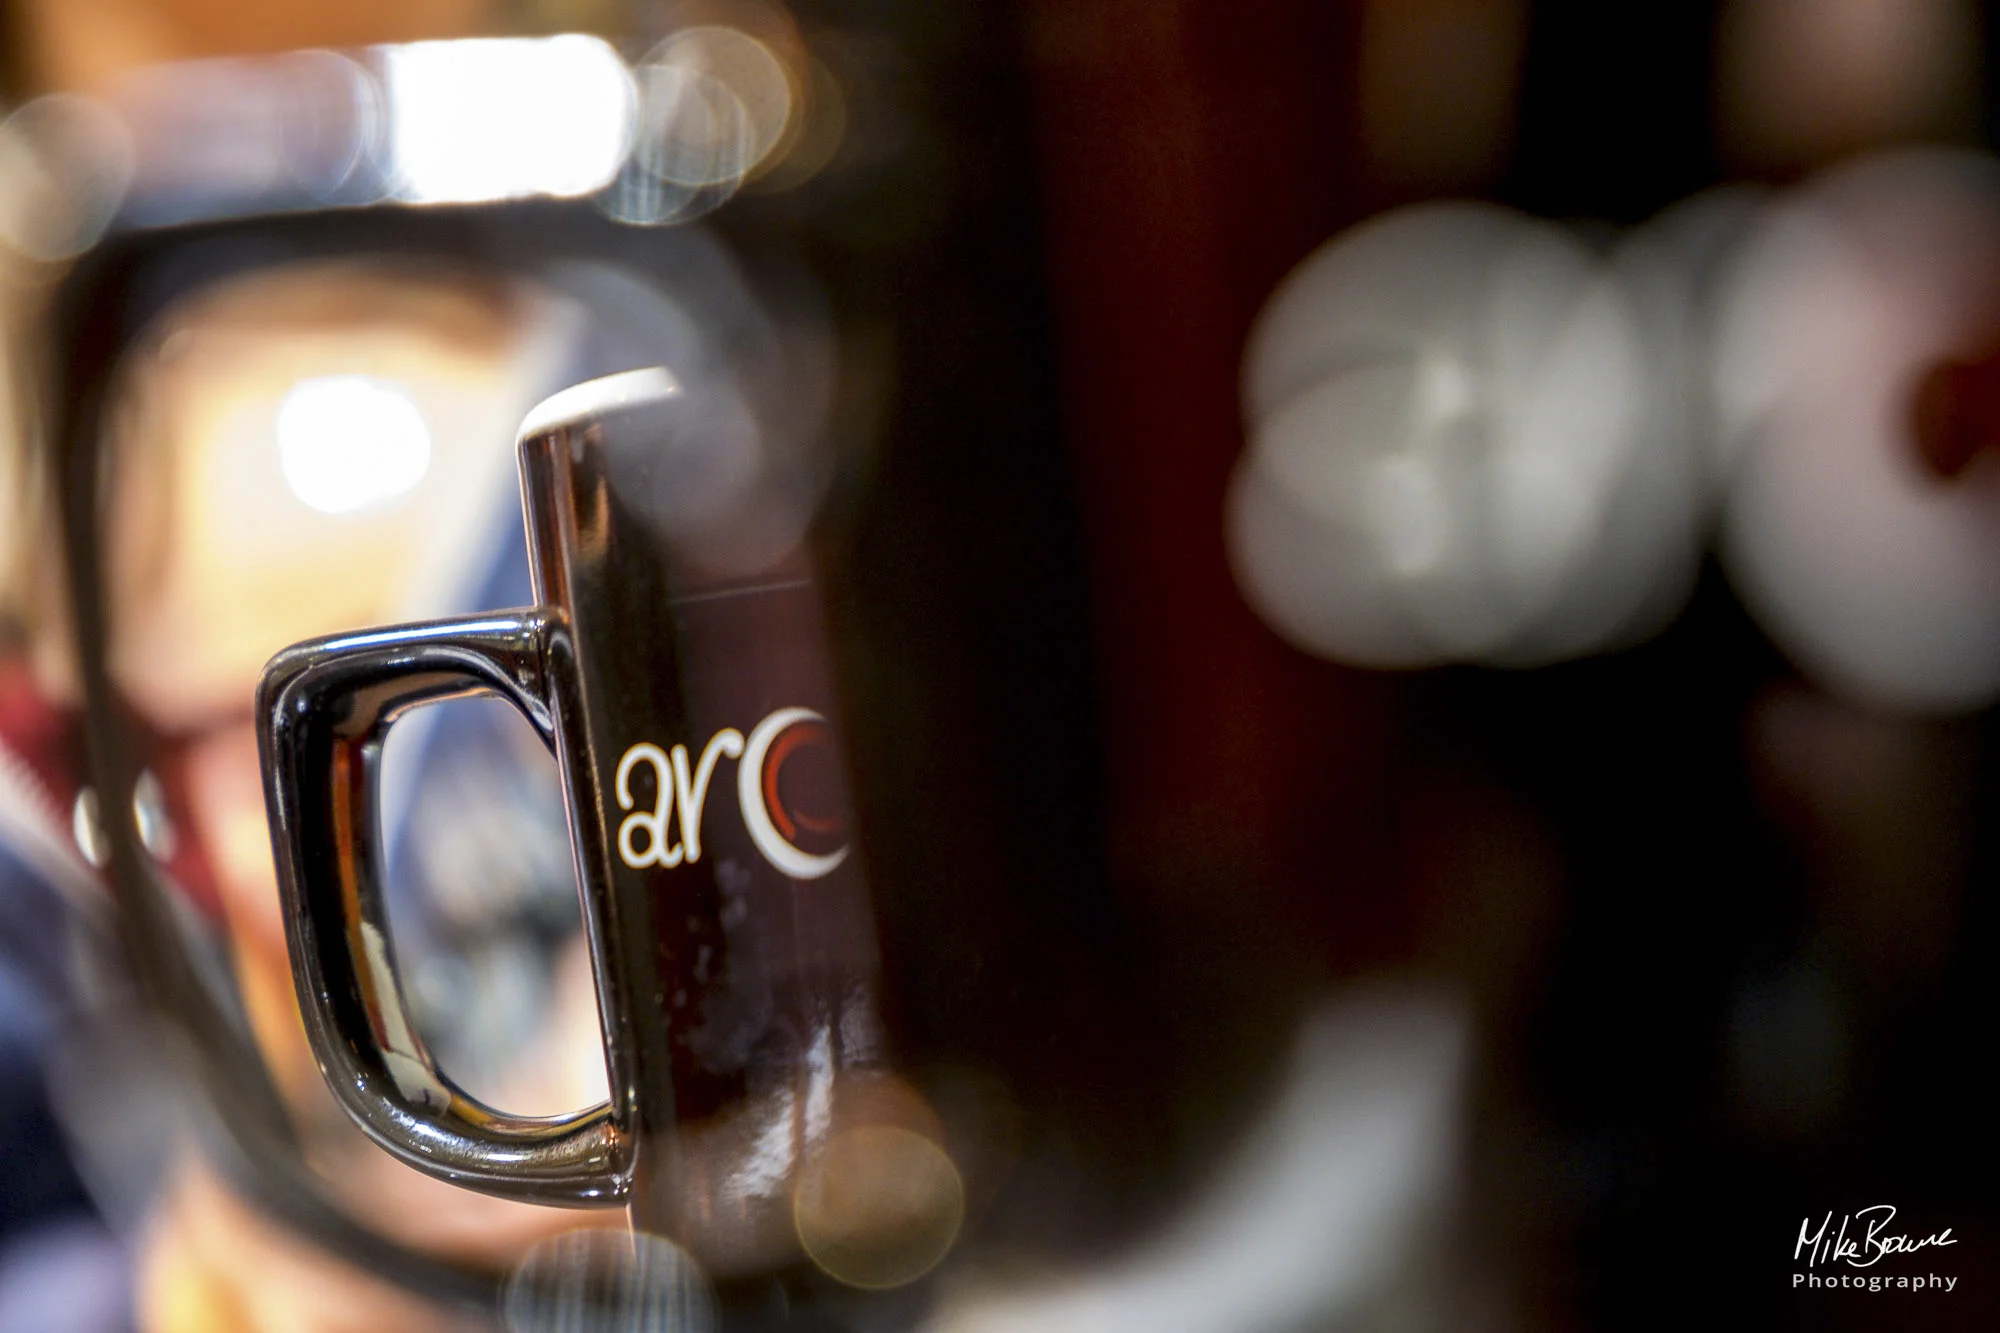 One branded coffe mug viewed through the handle of another